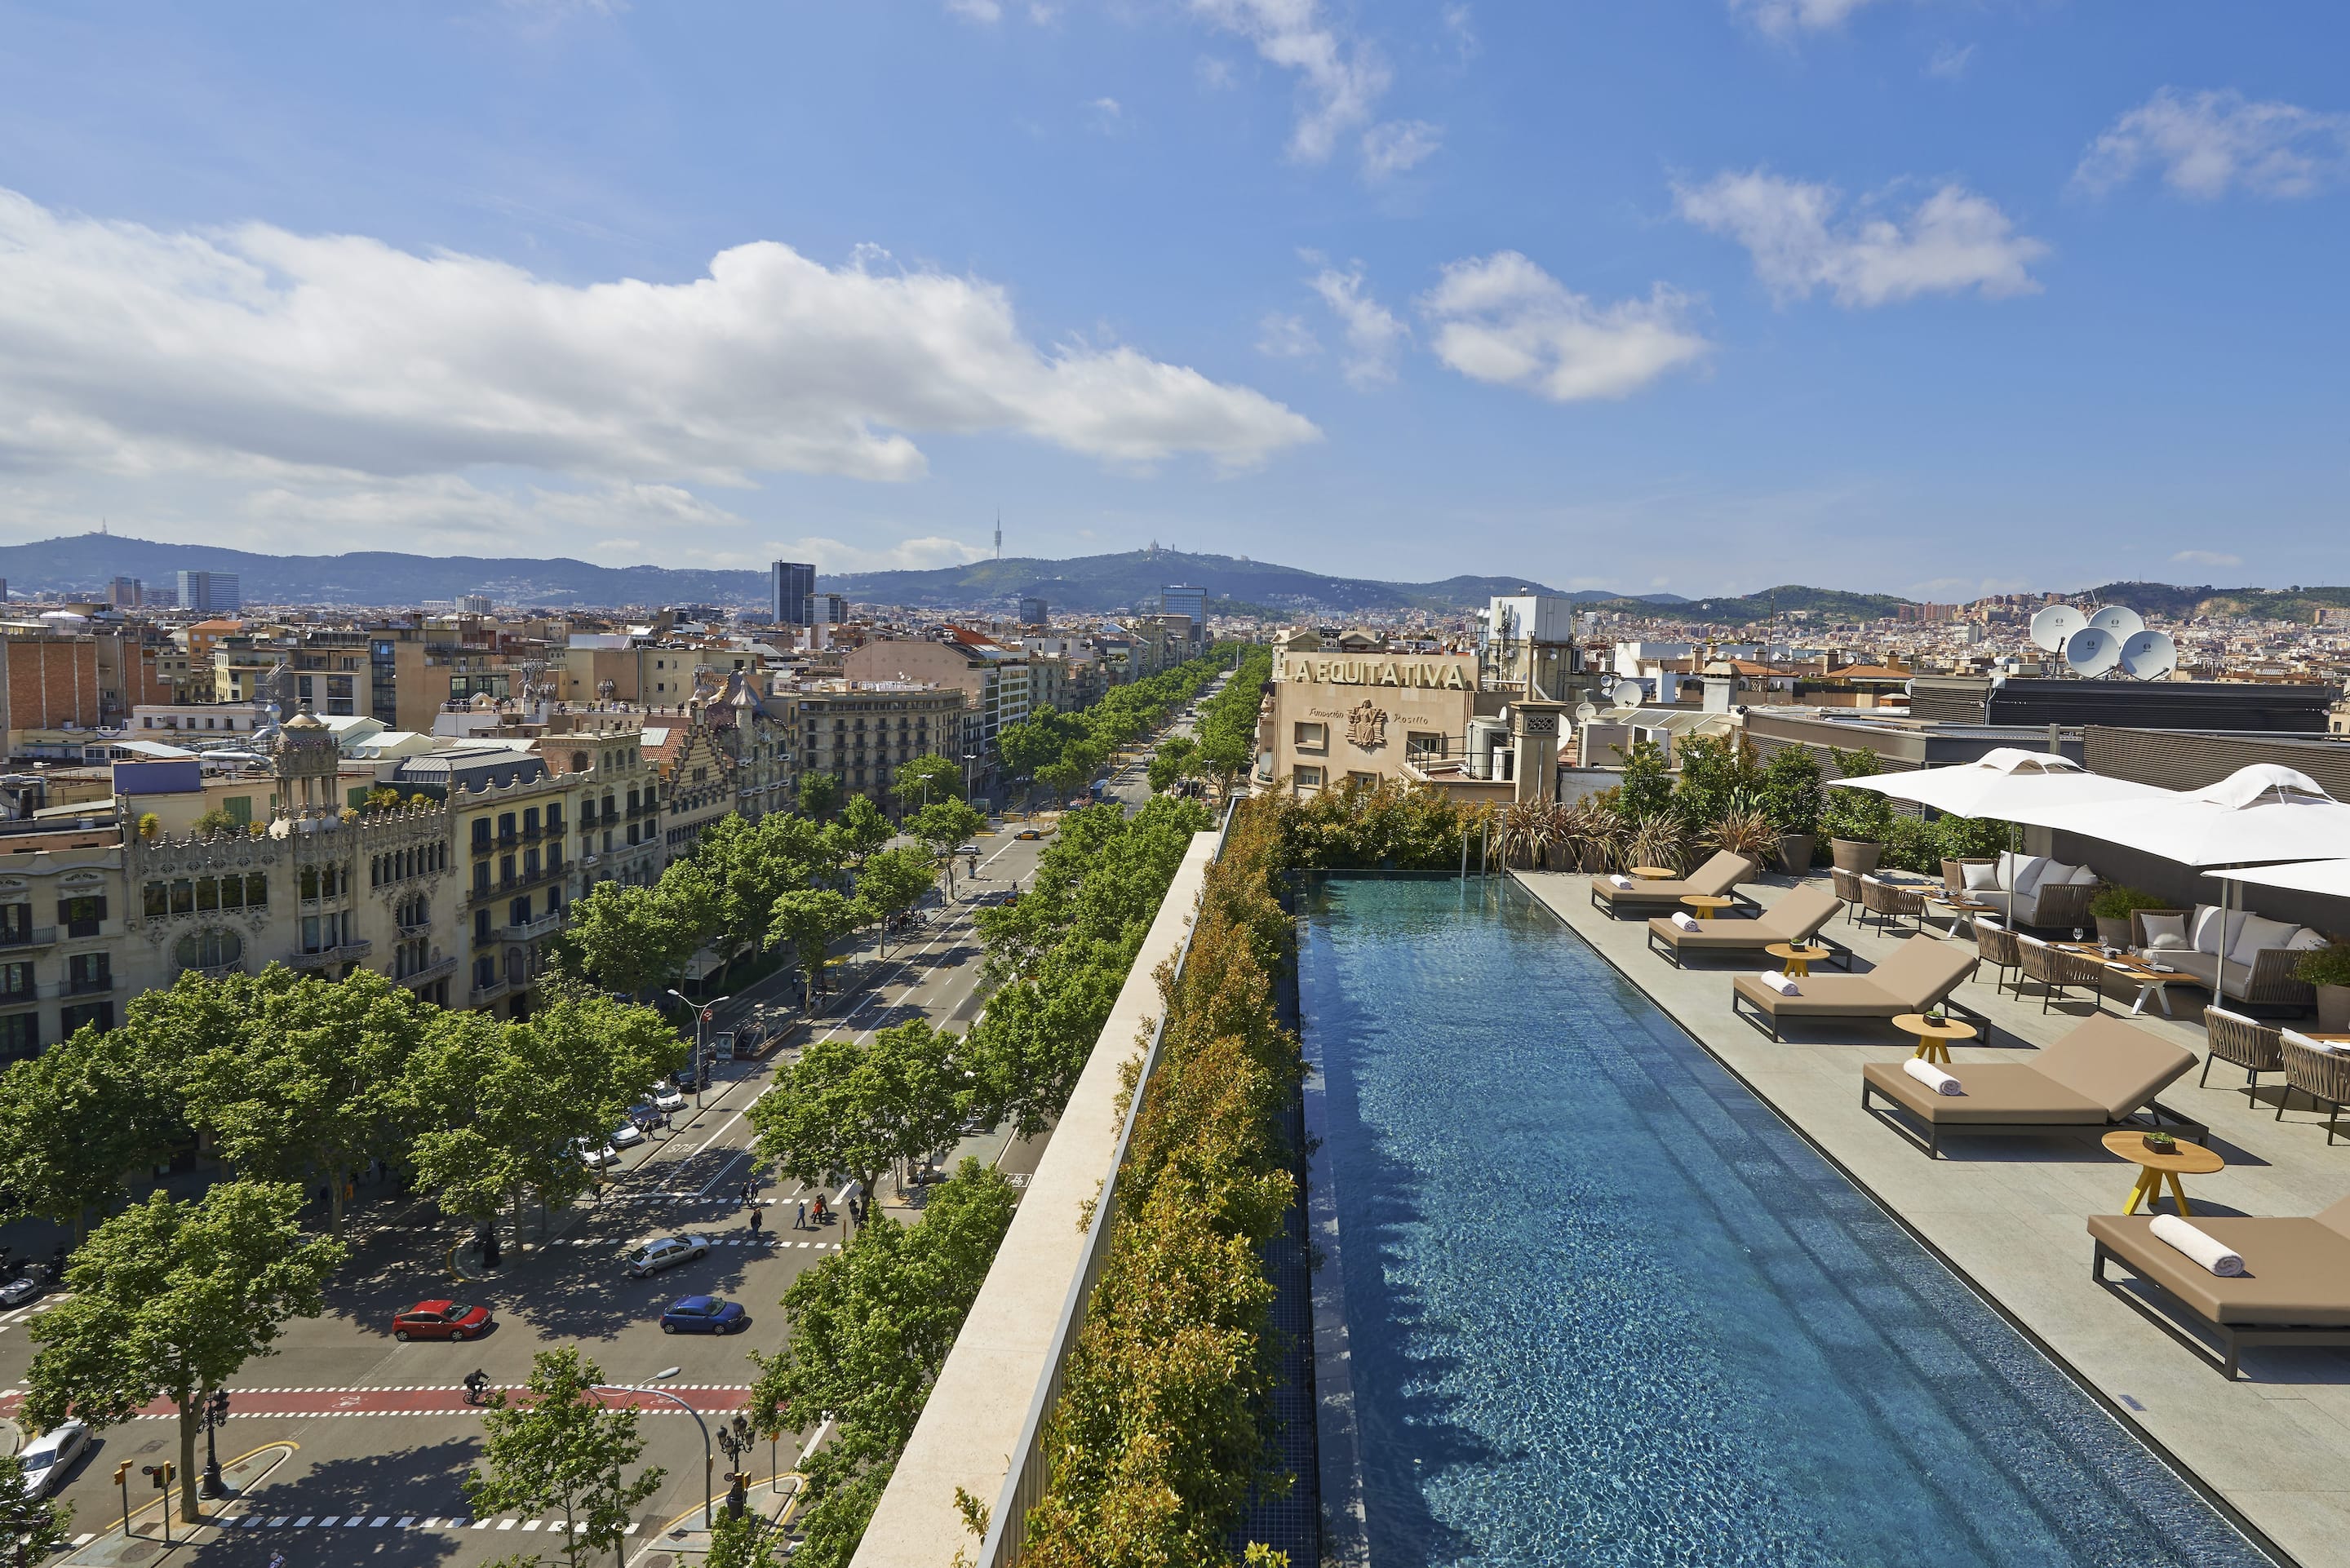 City view from the rooftop pool at Mandarin Oriental, Barcelona